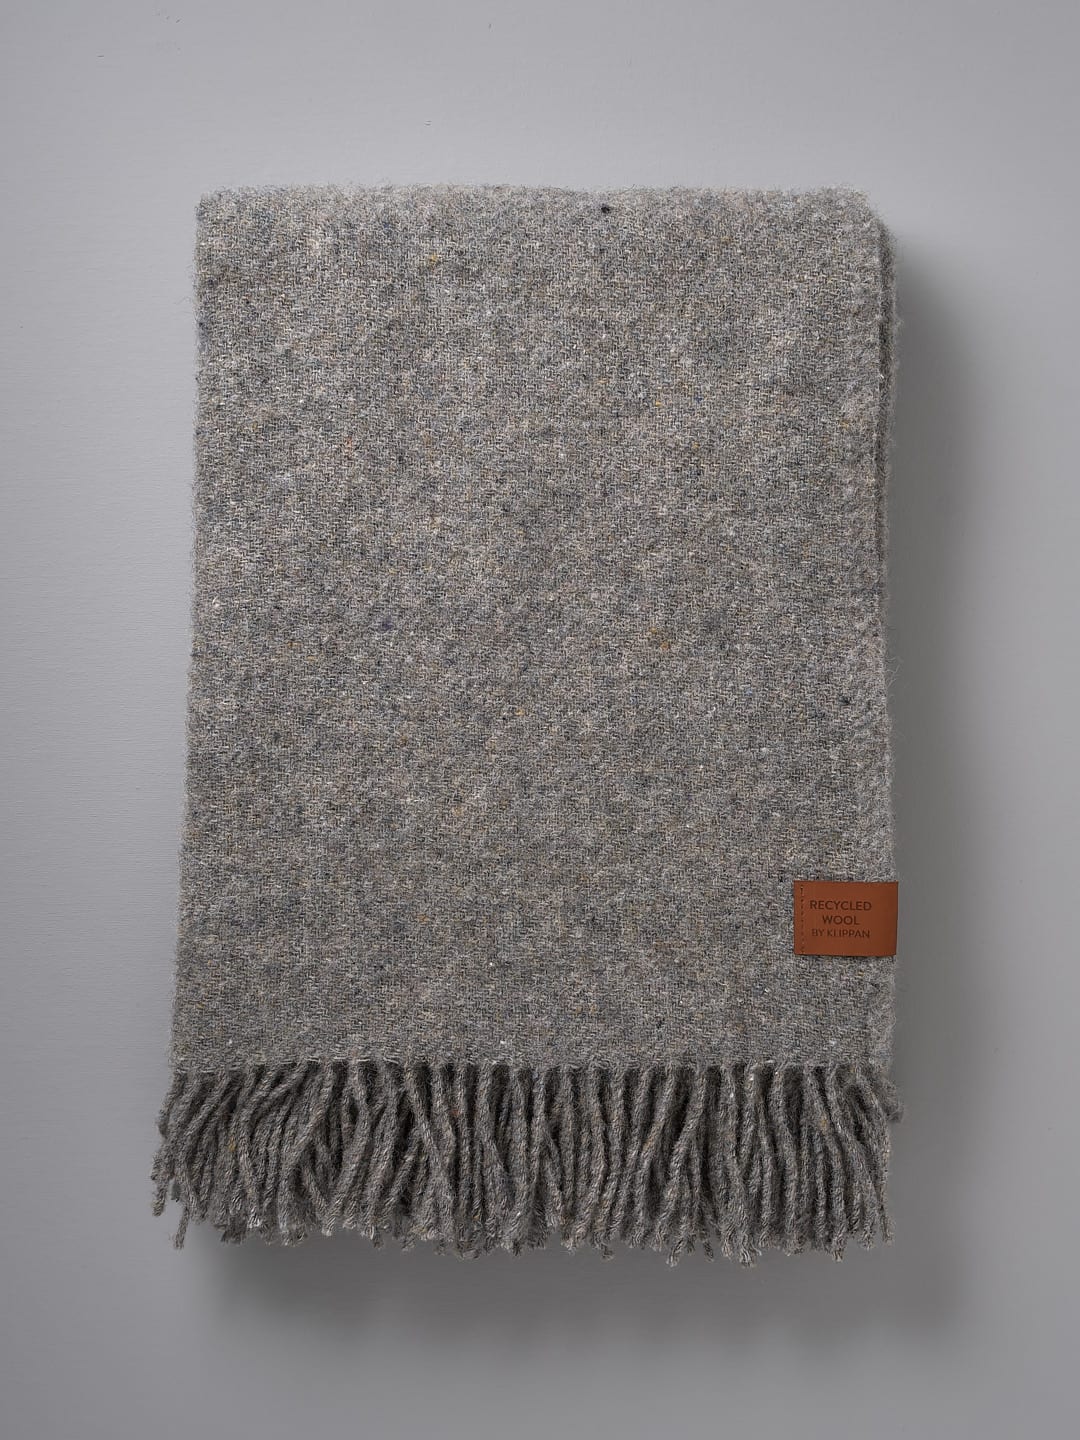 A Klippan Earth Blanket - Grey with fringes on a white background.